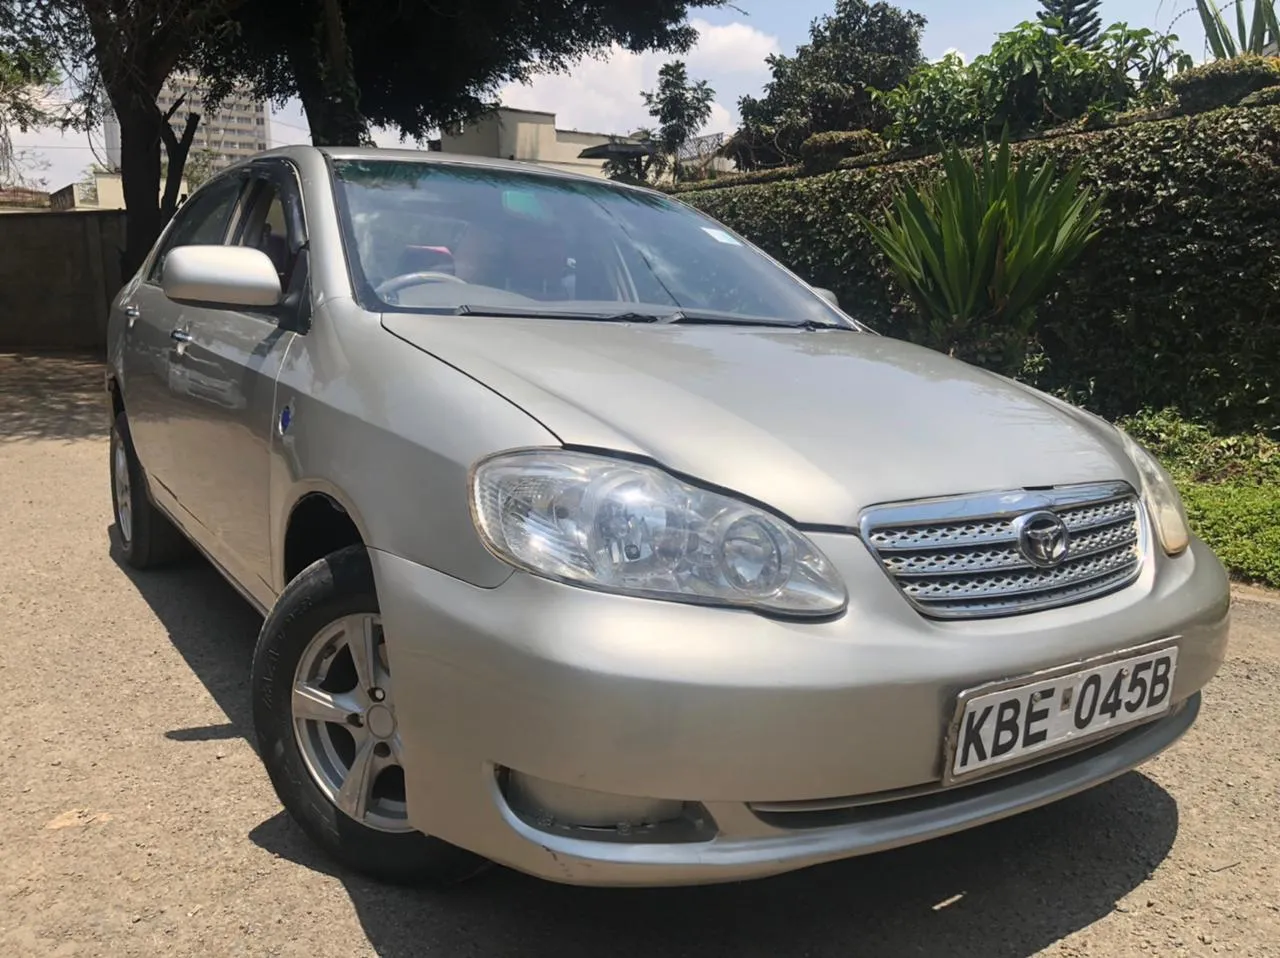 Cars Cars For Sale/Vehicles Saloon/Sedan-Toyota Corolla NZE 2003 Pay 20% 80% 60 Months Hot As New 7